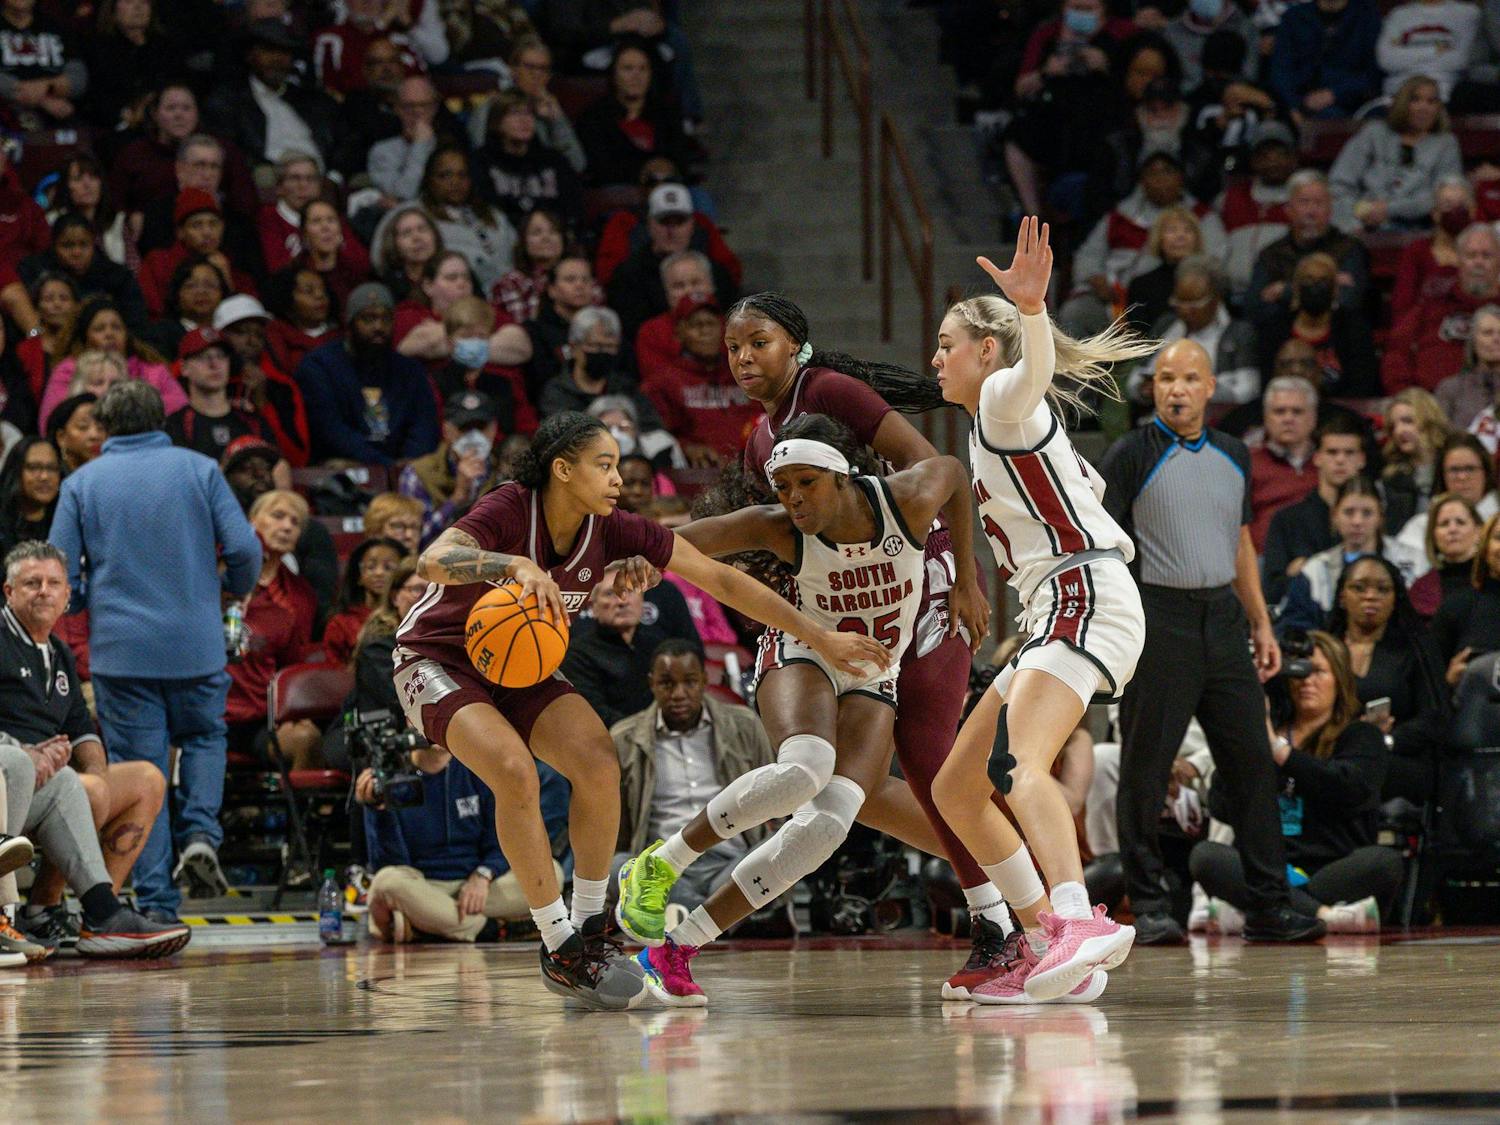 Sophomore forward Chloe Kitts attempts to make a defensive stop against a Mississippi State player at Colonia Life Arena on Jan. 7, 2024. Kitts scored 12 points in the Gamecocks' victory over the Bulldogs.